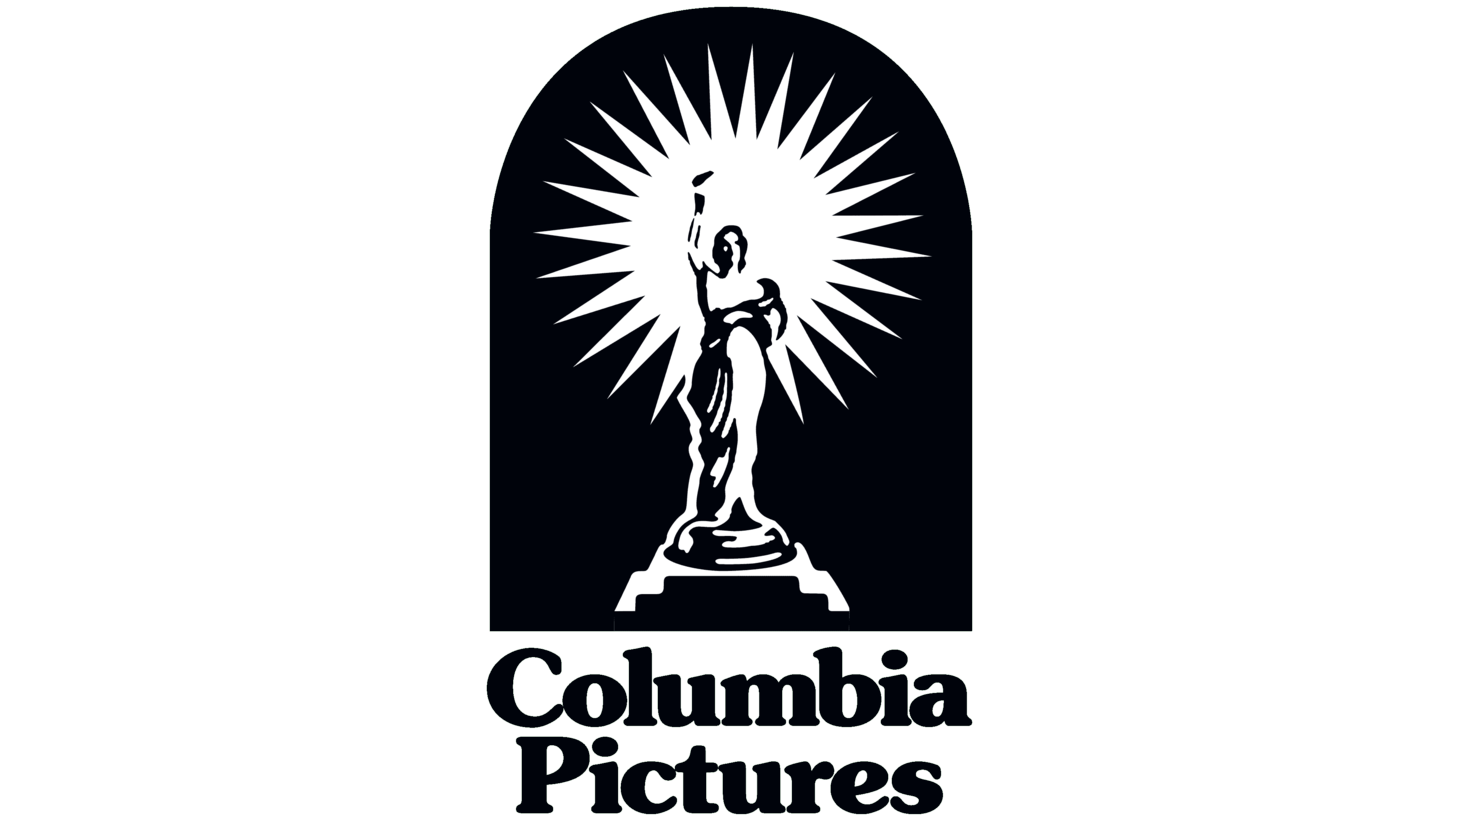 Columbia pictures sign 1981